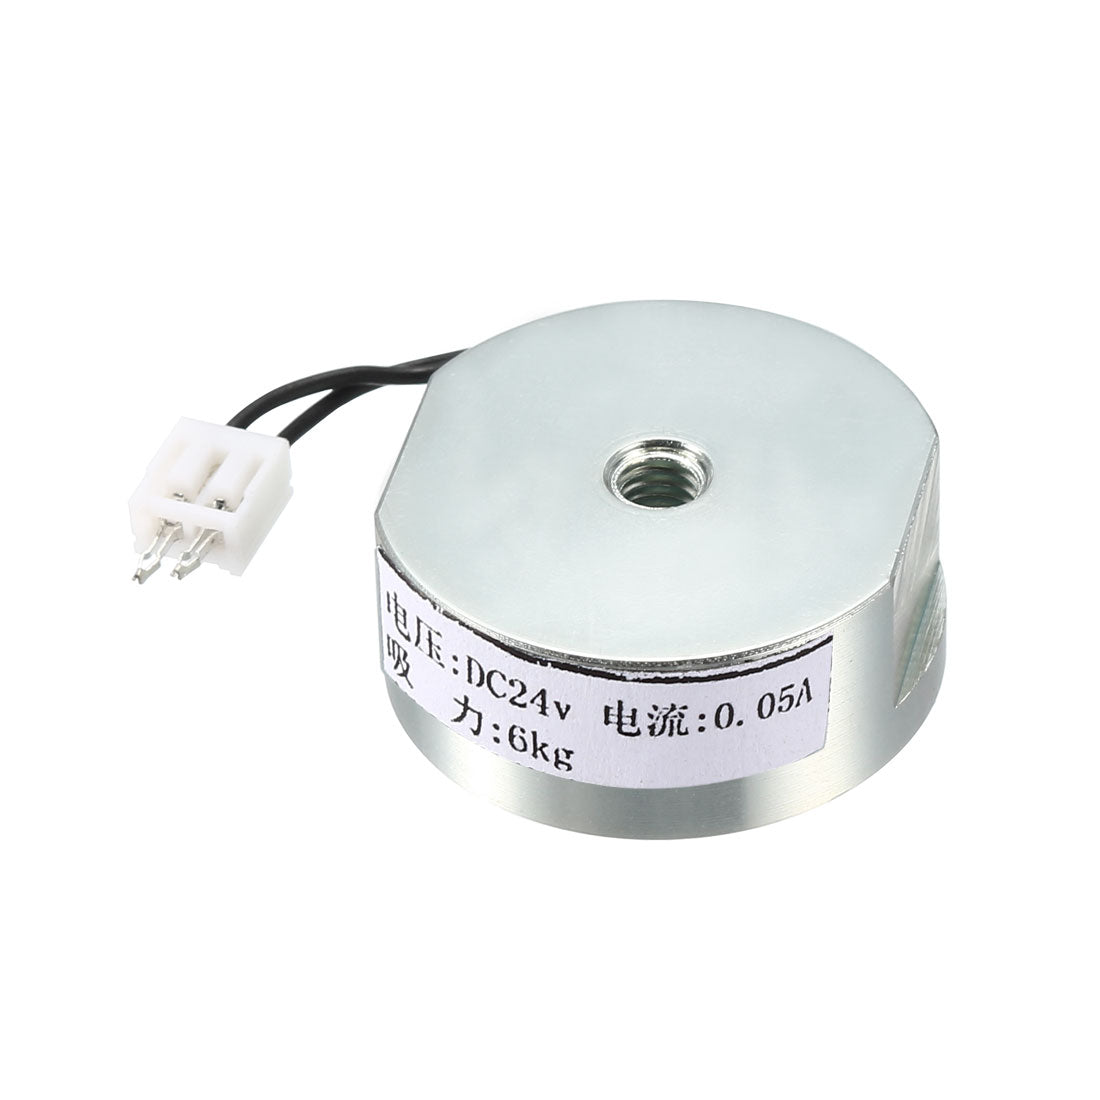 uxcell Uxcell DC24V 60N 6KG Lift Holding Electromagnet Sucking Disc Electric Lifting Magnet Solenoid